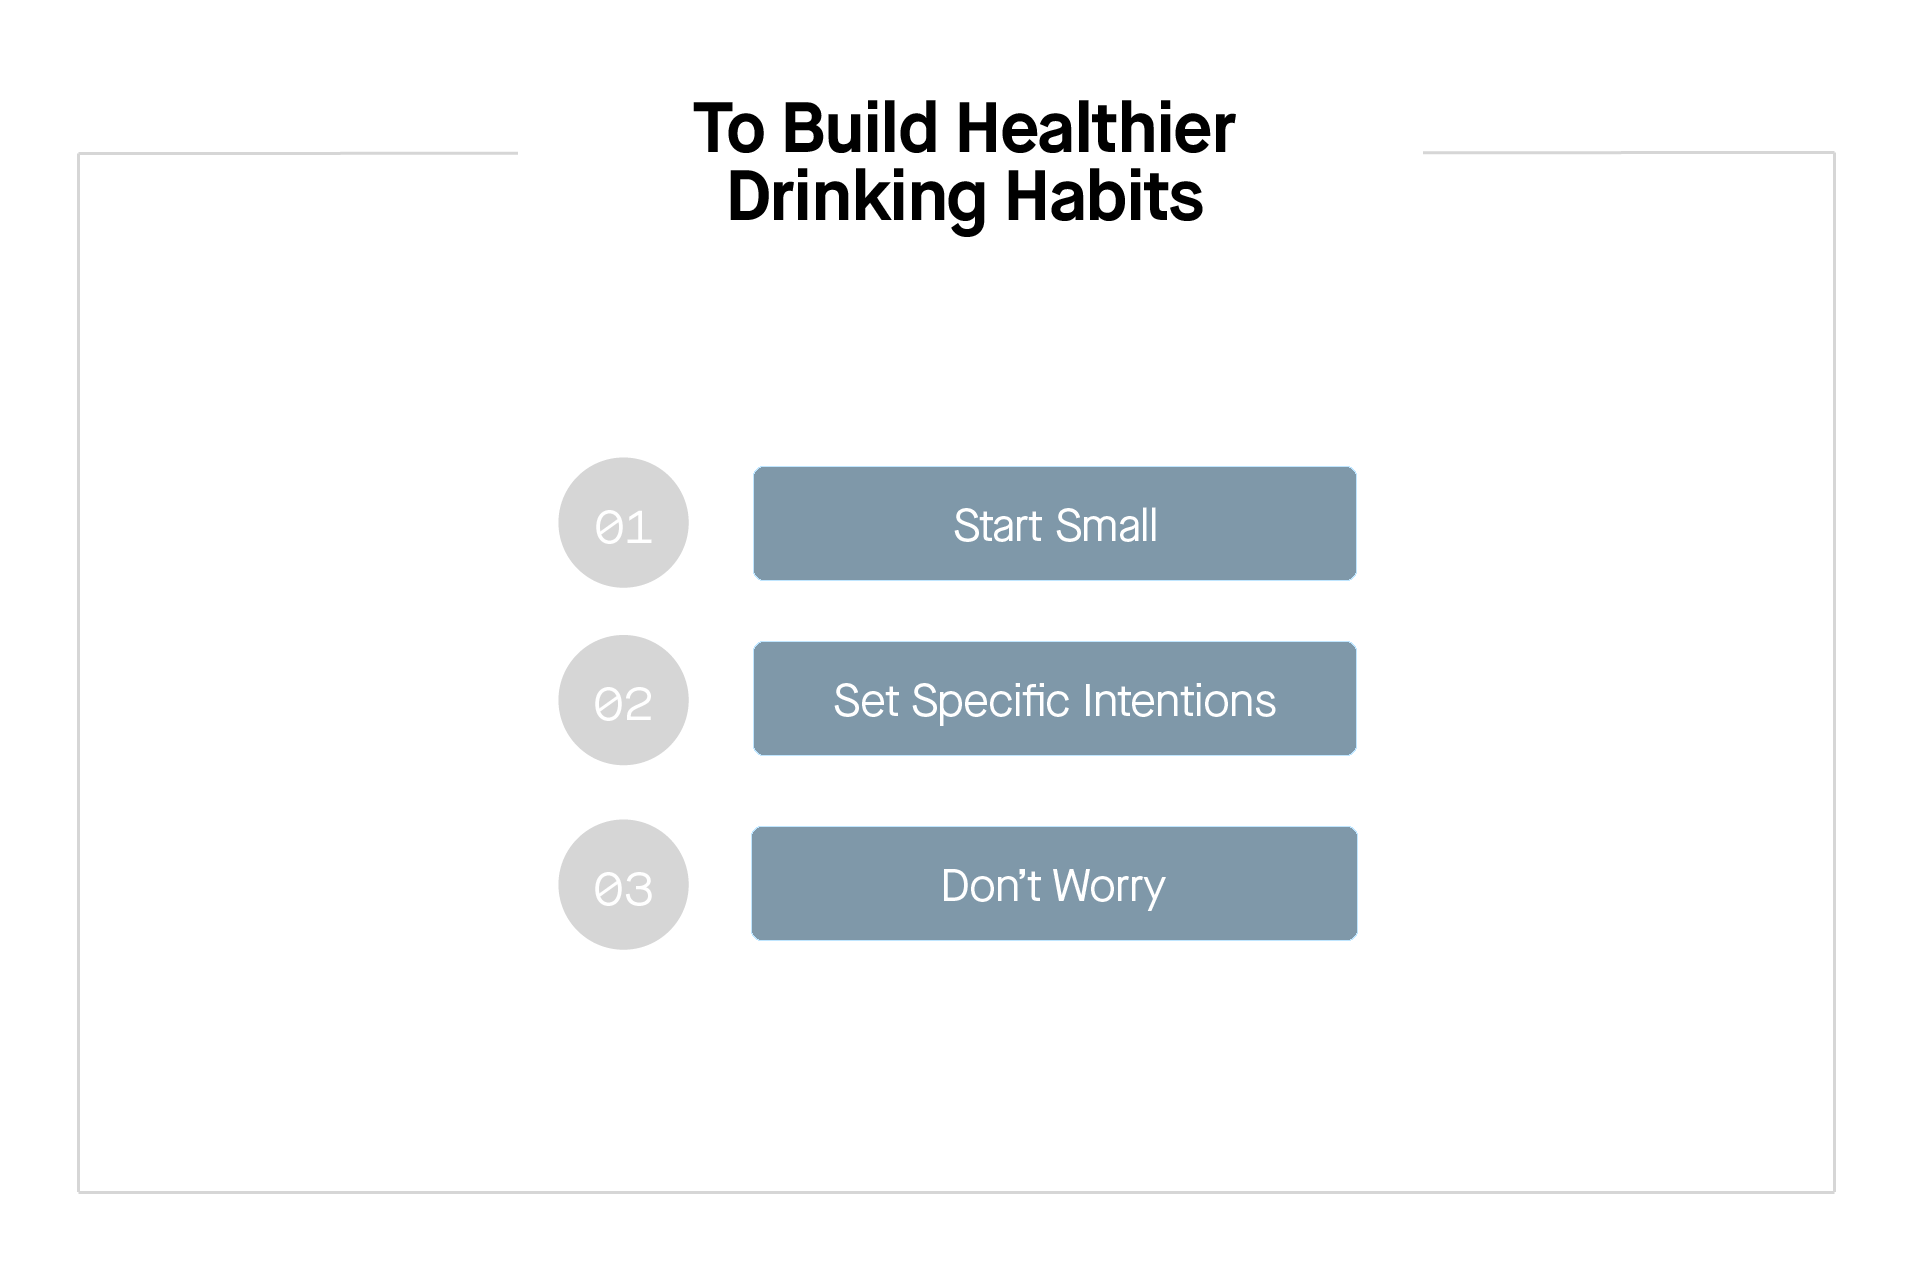 How to build healthier drinking habits